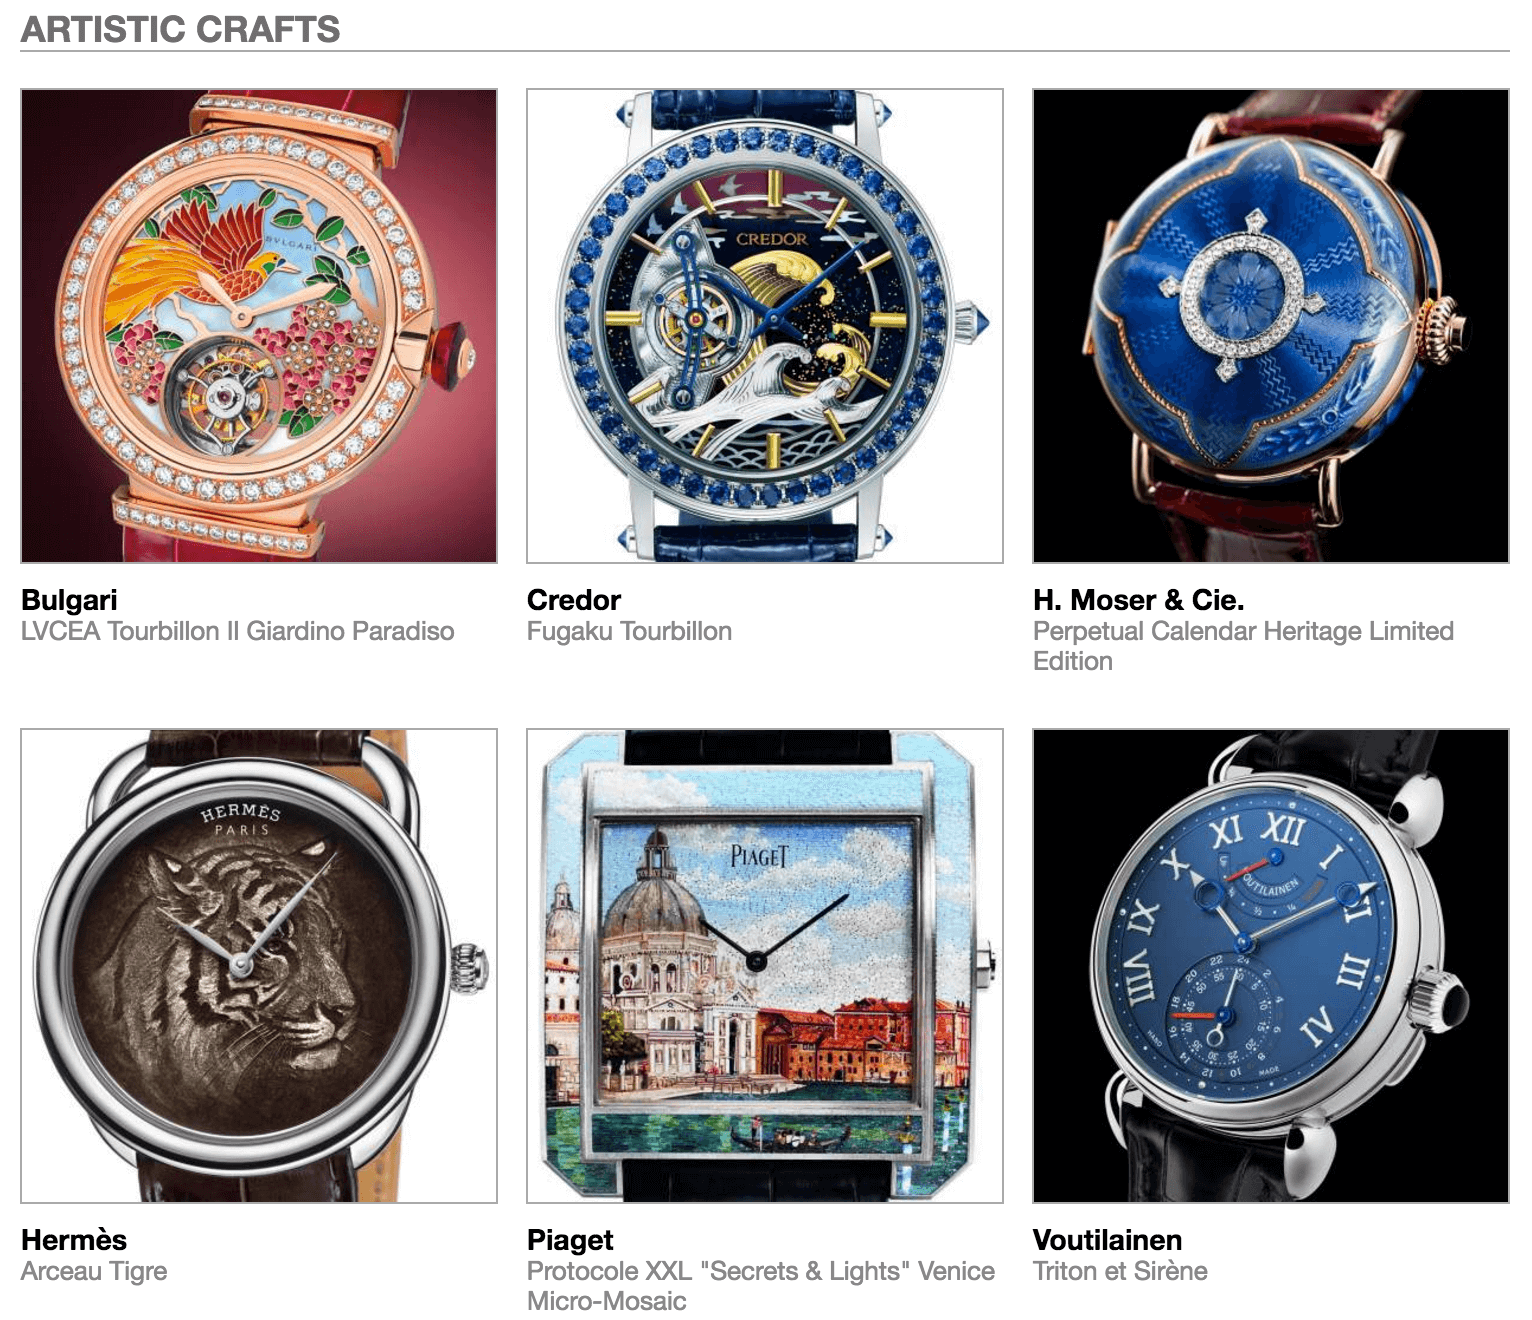 Pre-selected Artistic Craft watches in the 2016 GPHG